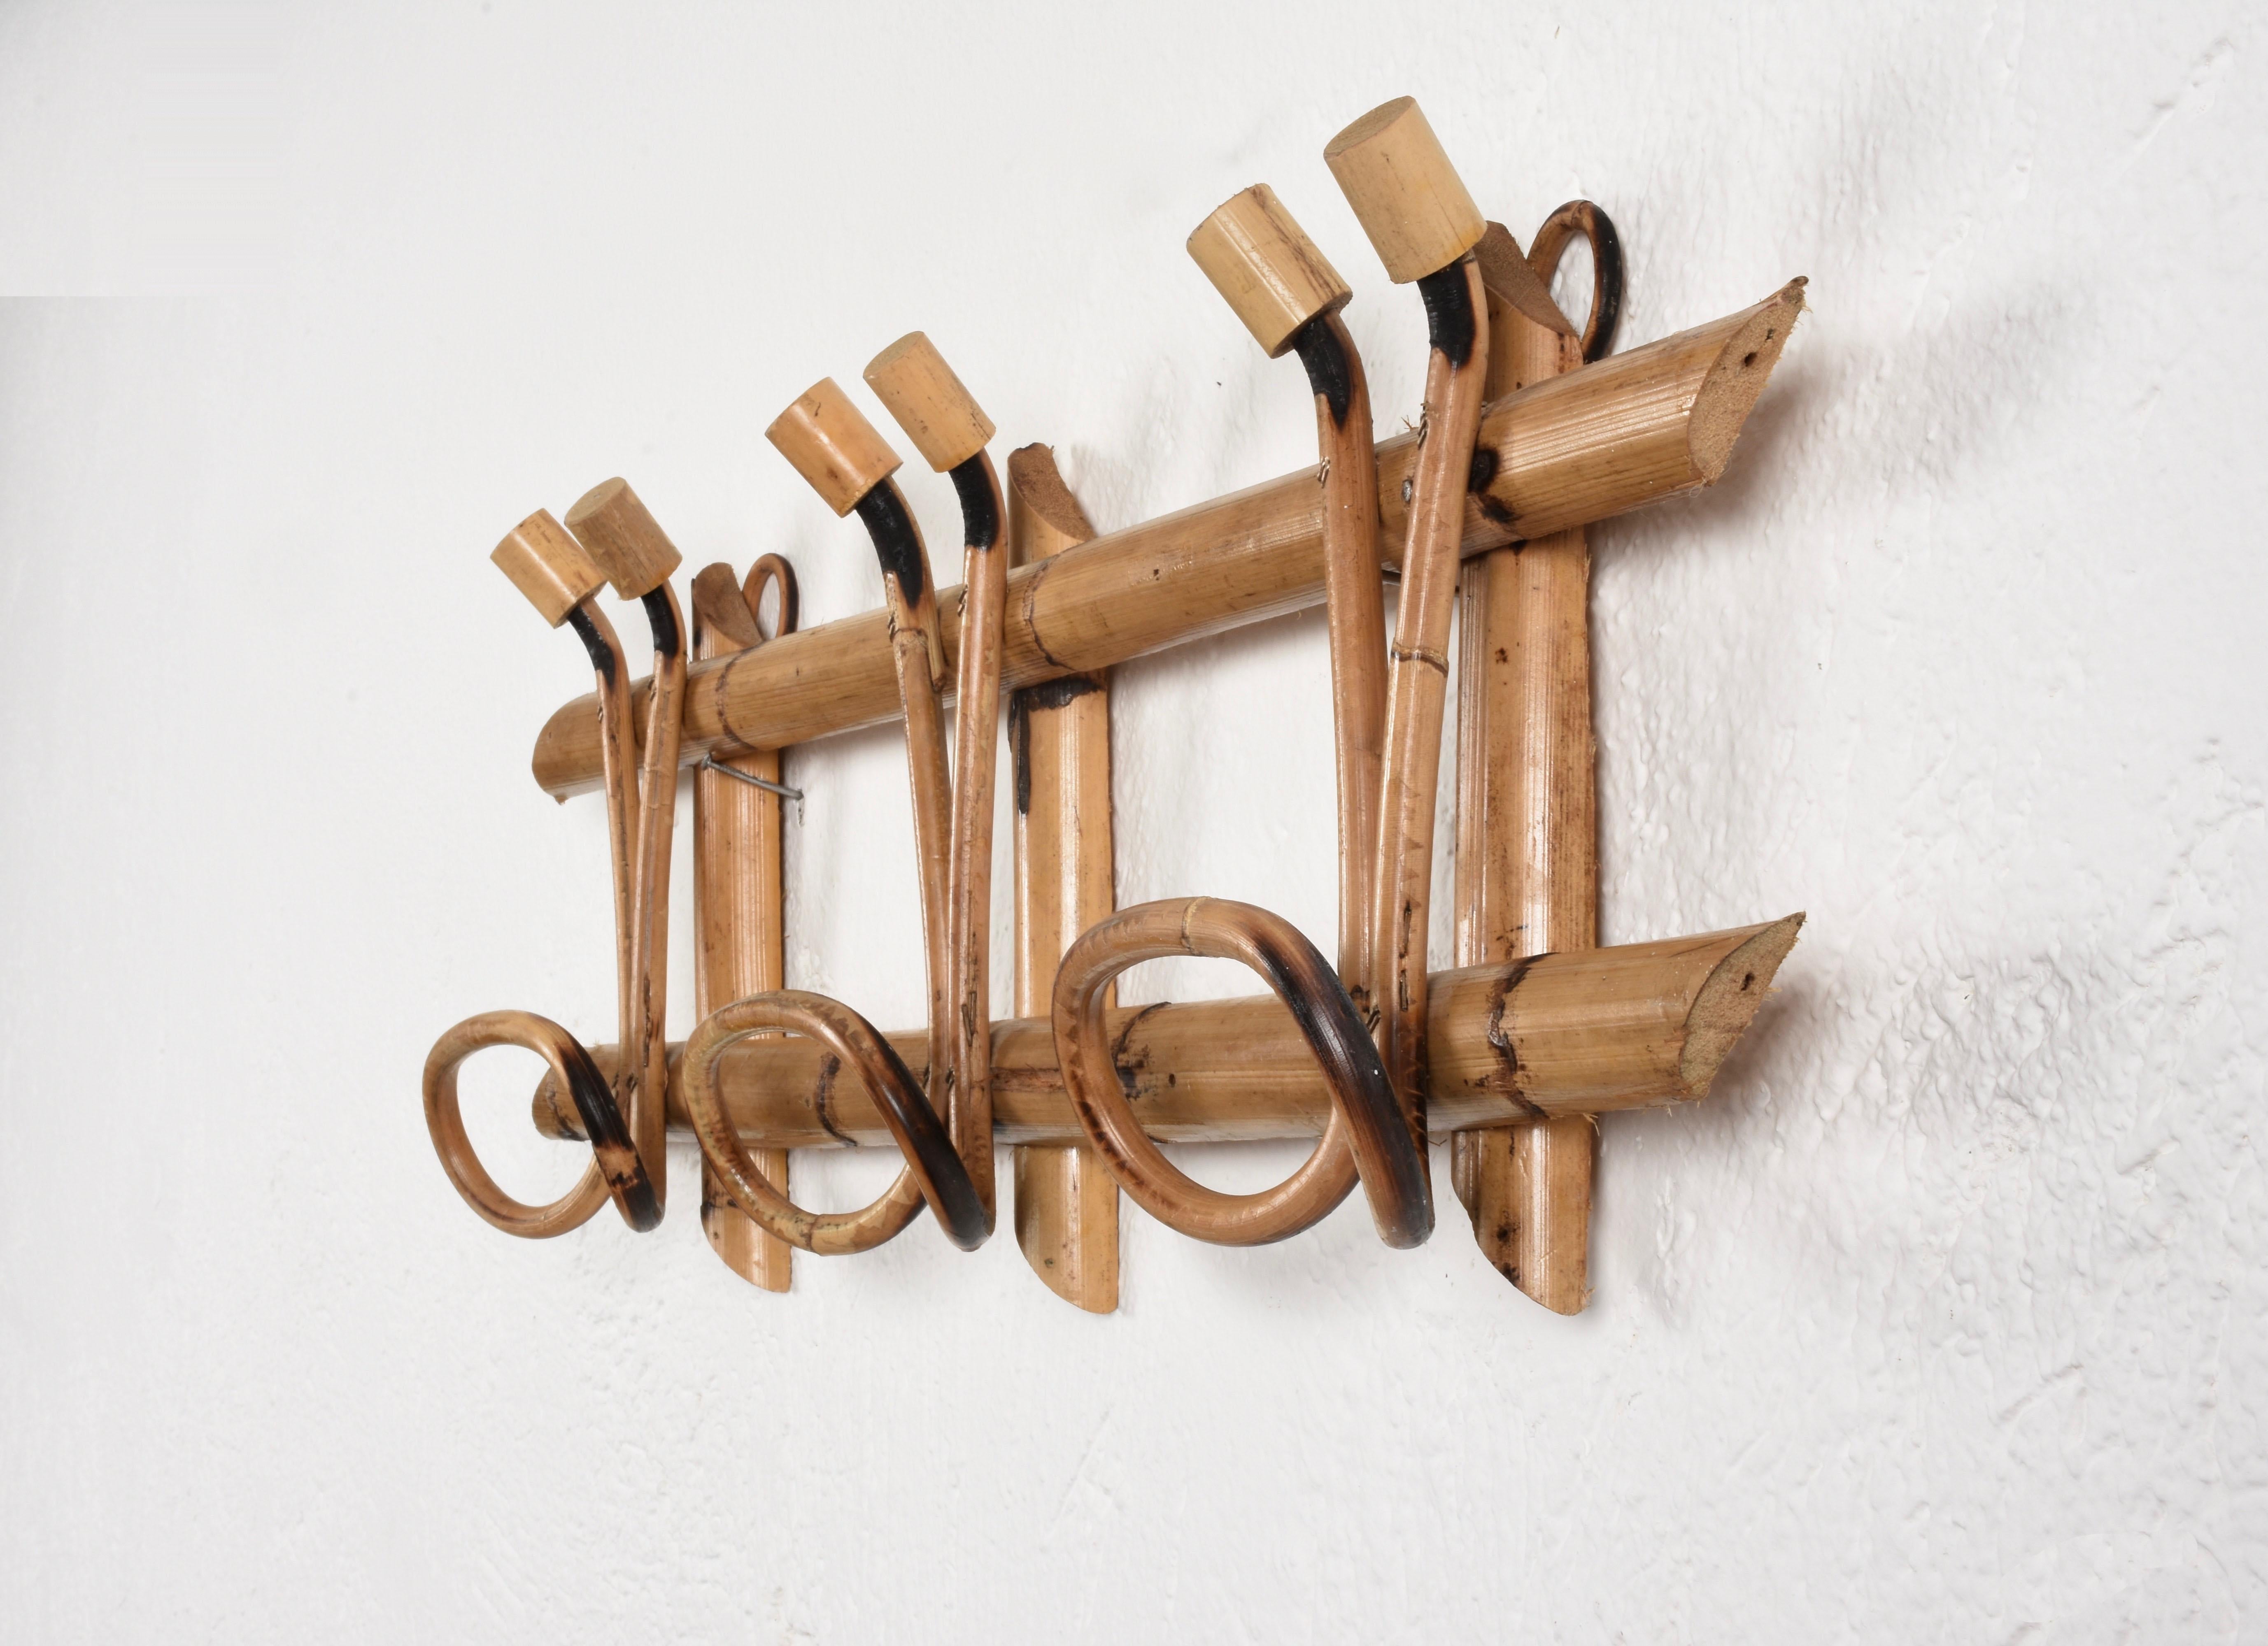 Beautiful midcentury French riviera rattan and bamboo coat rack.

The piece was produced in Italy in 1961 and features three upper hooks and lower hooks for hanging clothes.

An item in wonderful conditions that will enrich a midcentury living